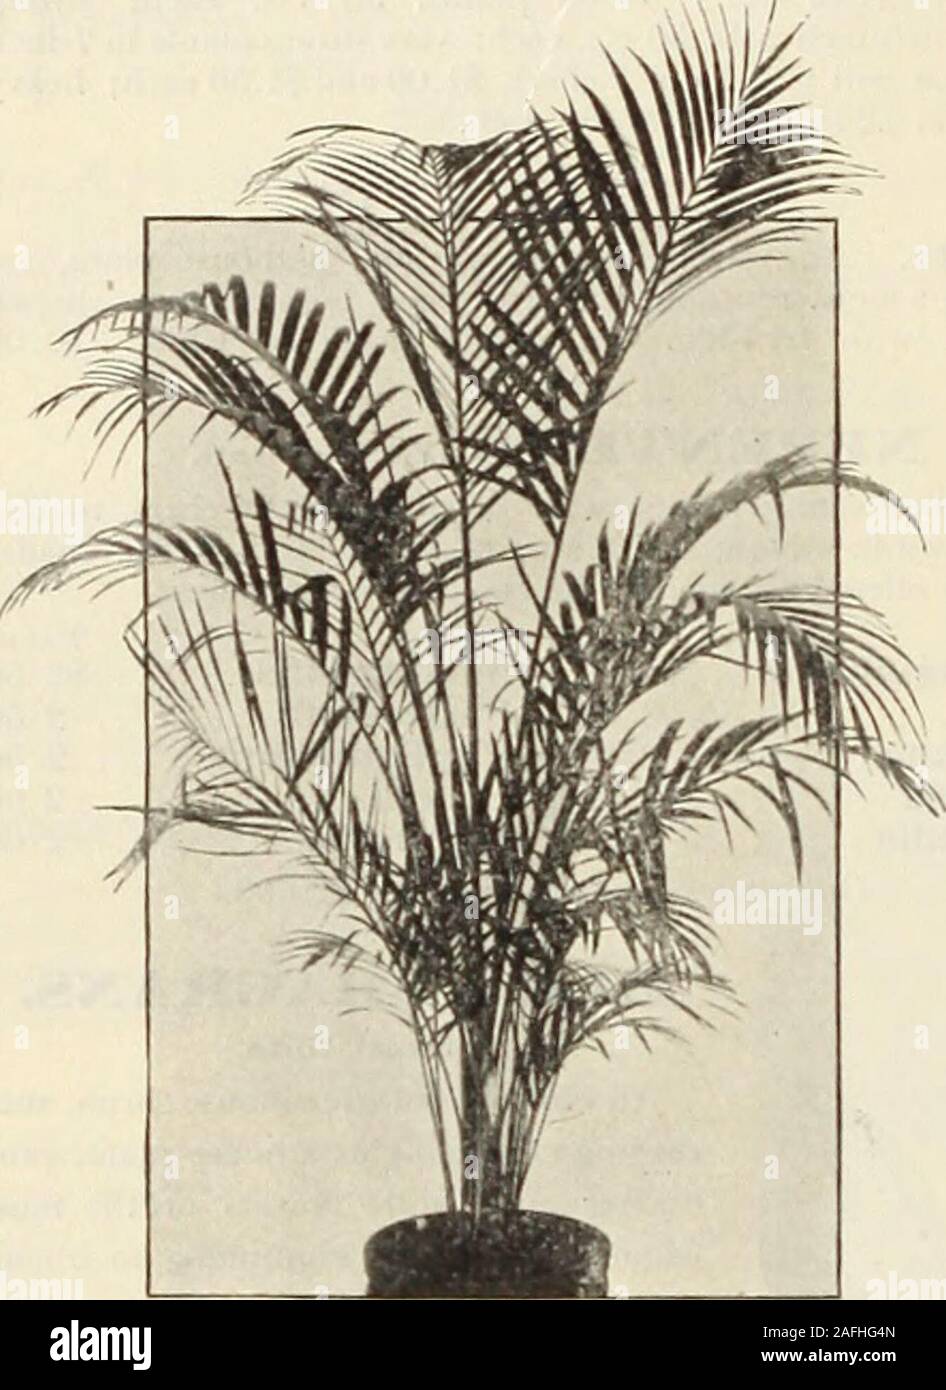 . Dreer's garden book 1915. inches high, 553.50 each.Deckeria Nobilis. A very rare Palm, with narrow, divided pinnre of alight green color, the stems closely protected with long, light-coloredspines; requiies a close, high temperature. 5-incli pots, $3.00 each.ElStS Guineensis. The Oil Palm, a very decorative species, with darkgreen pinnatified foliage, o-inch pots, $1.00 each. Specimens in 8-inchtubs, f.S.OO to ^io.OO each.Hyophorbae Amaricaulis. An interesting Palm for a collection in awarm conservatory, similar in habit of growth to the Arecas, with bronzy-red stems and olive-green foliage. Stock Photo